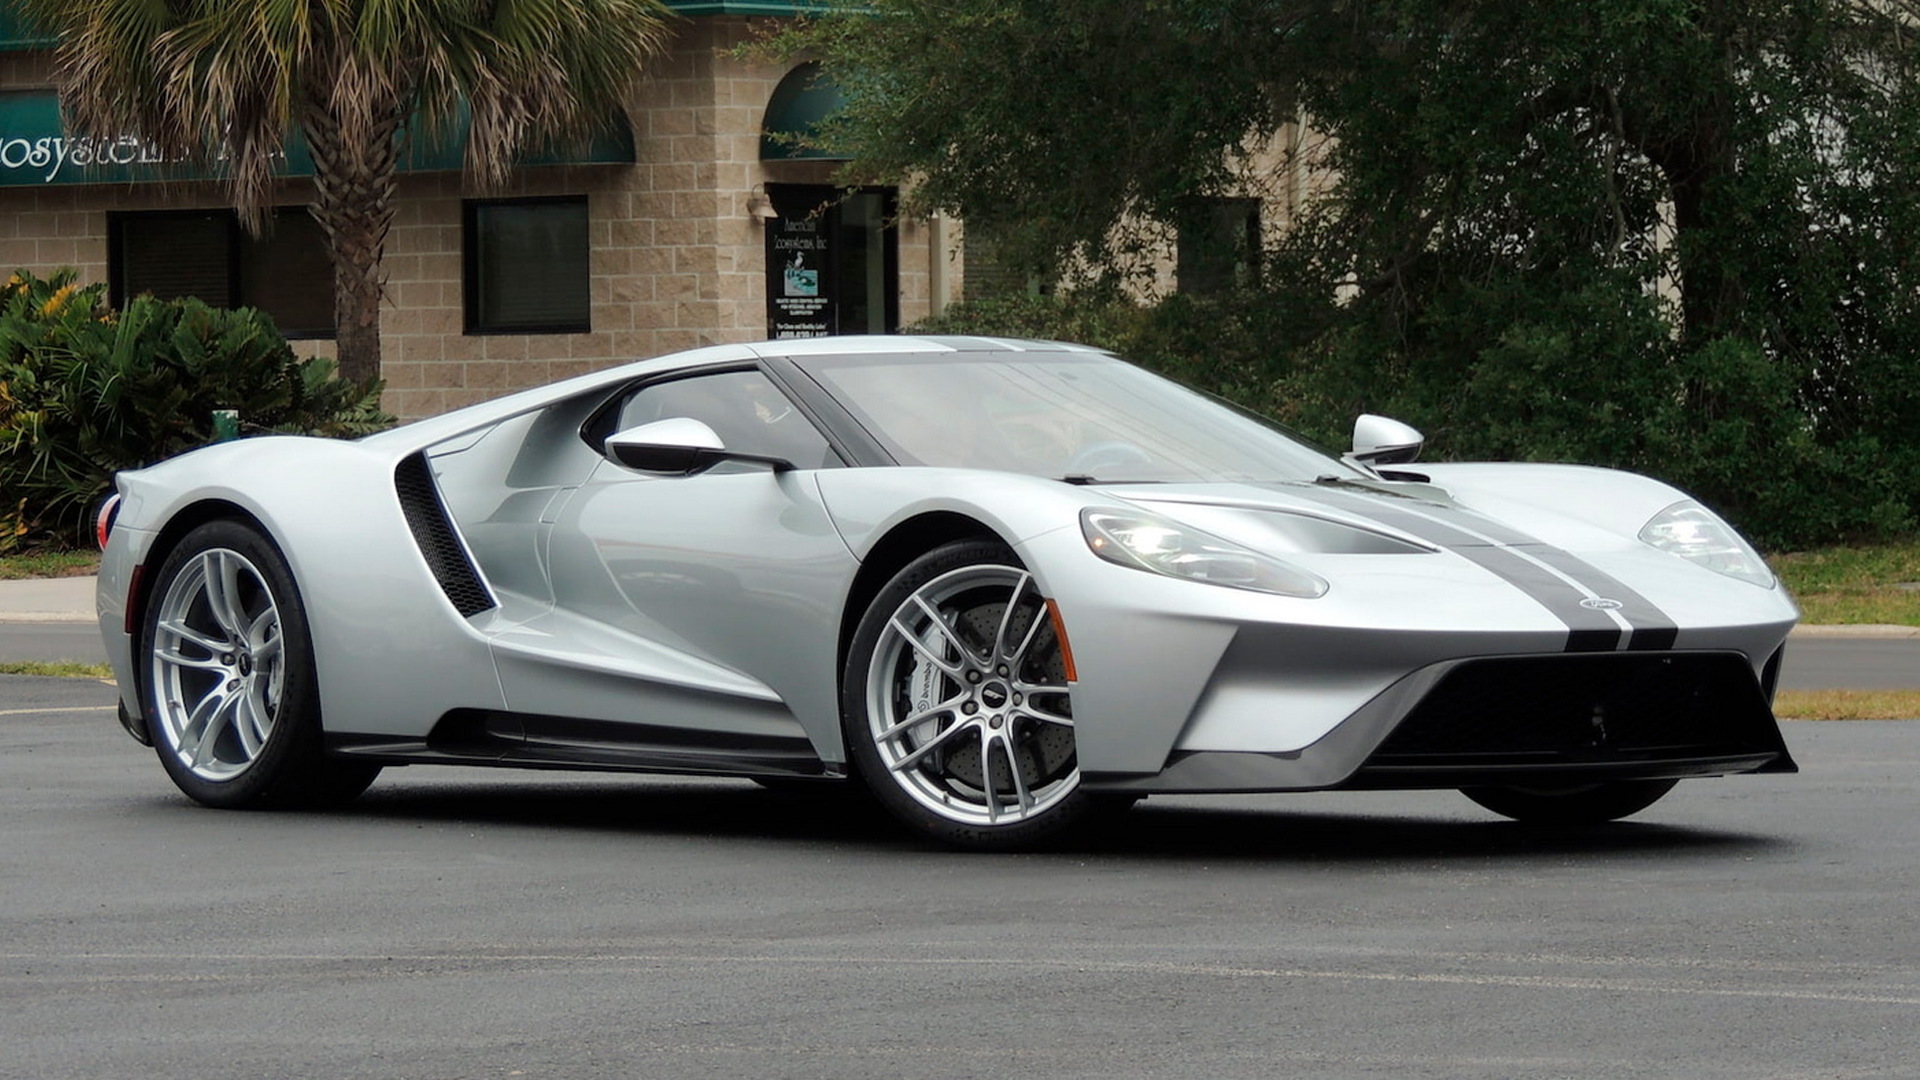 2017 Ford GT sold at Mecum auction for $1,815,000